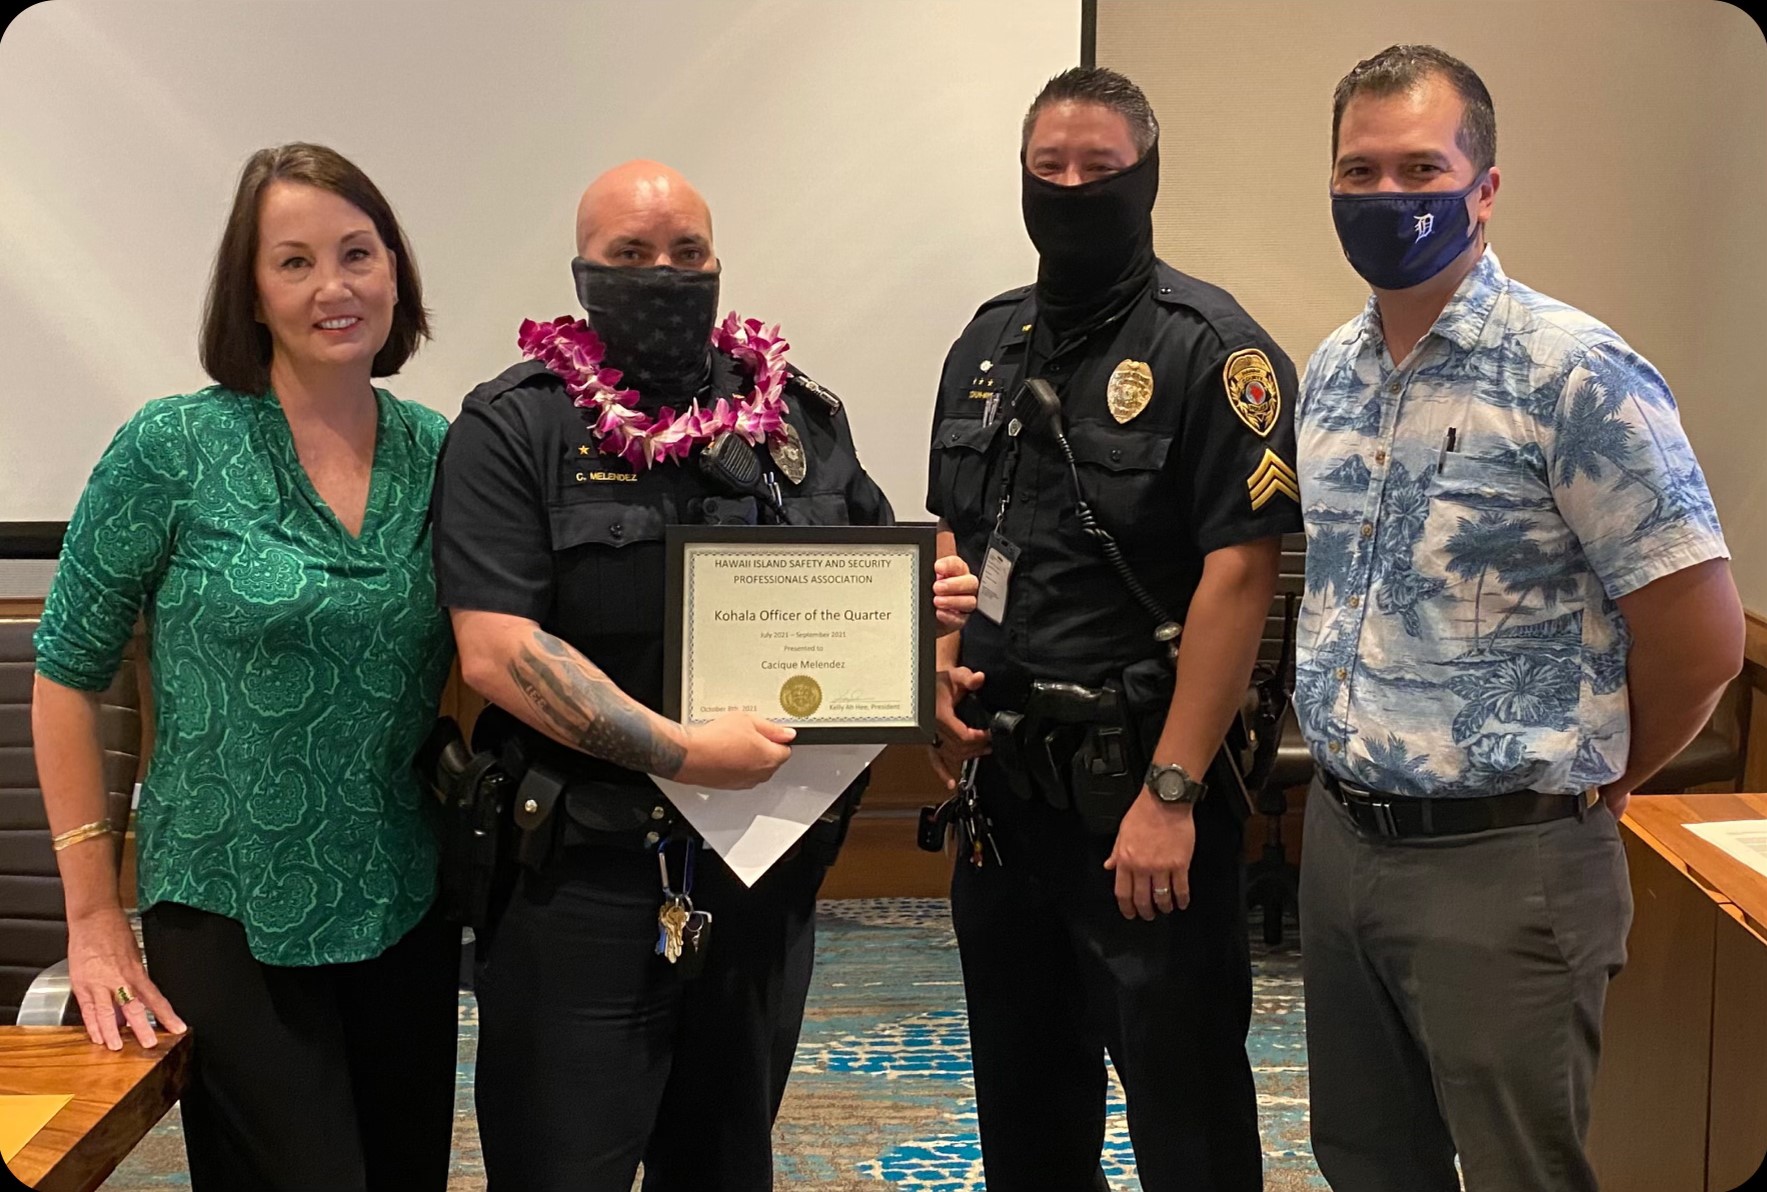 10-12-21 Officer Cacique Melendez Honored by HISSPA for Diffusing